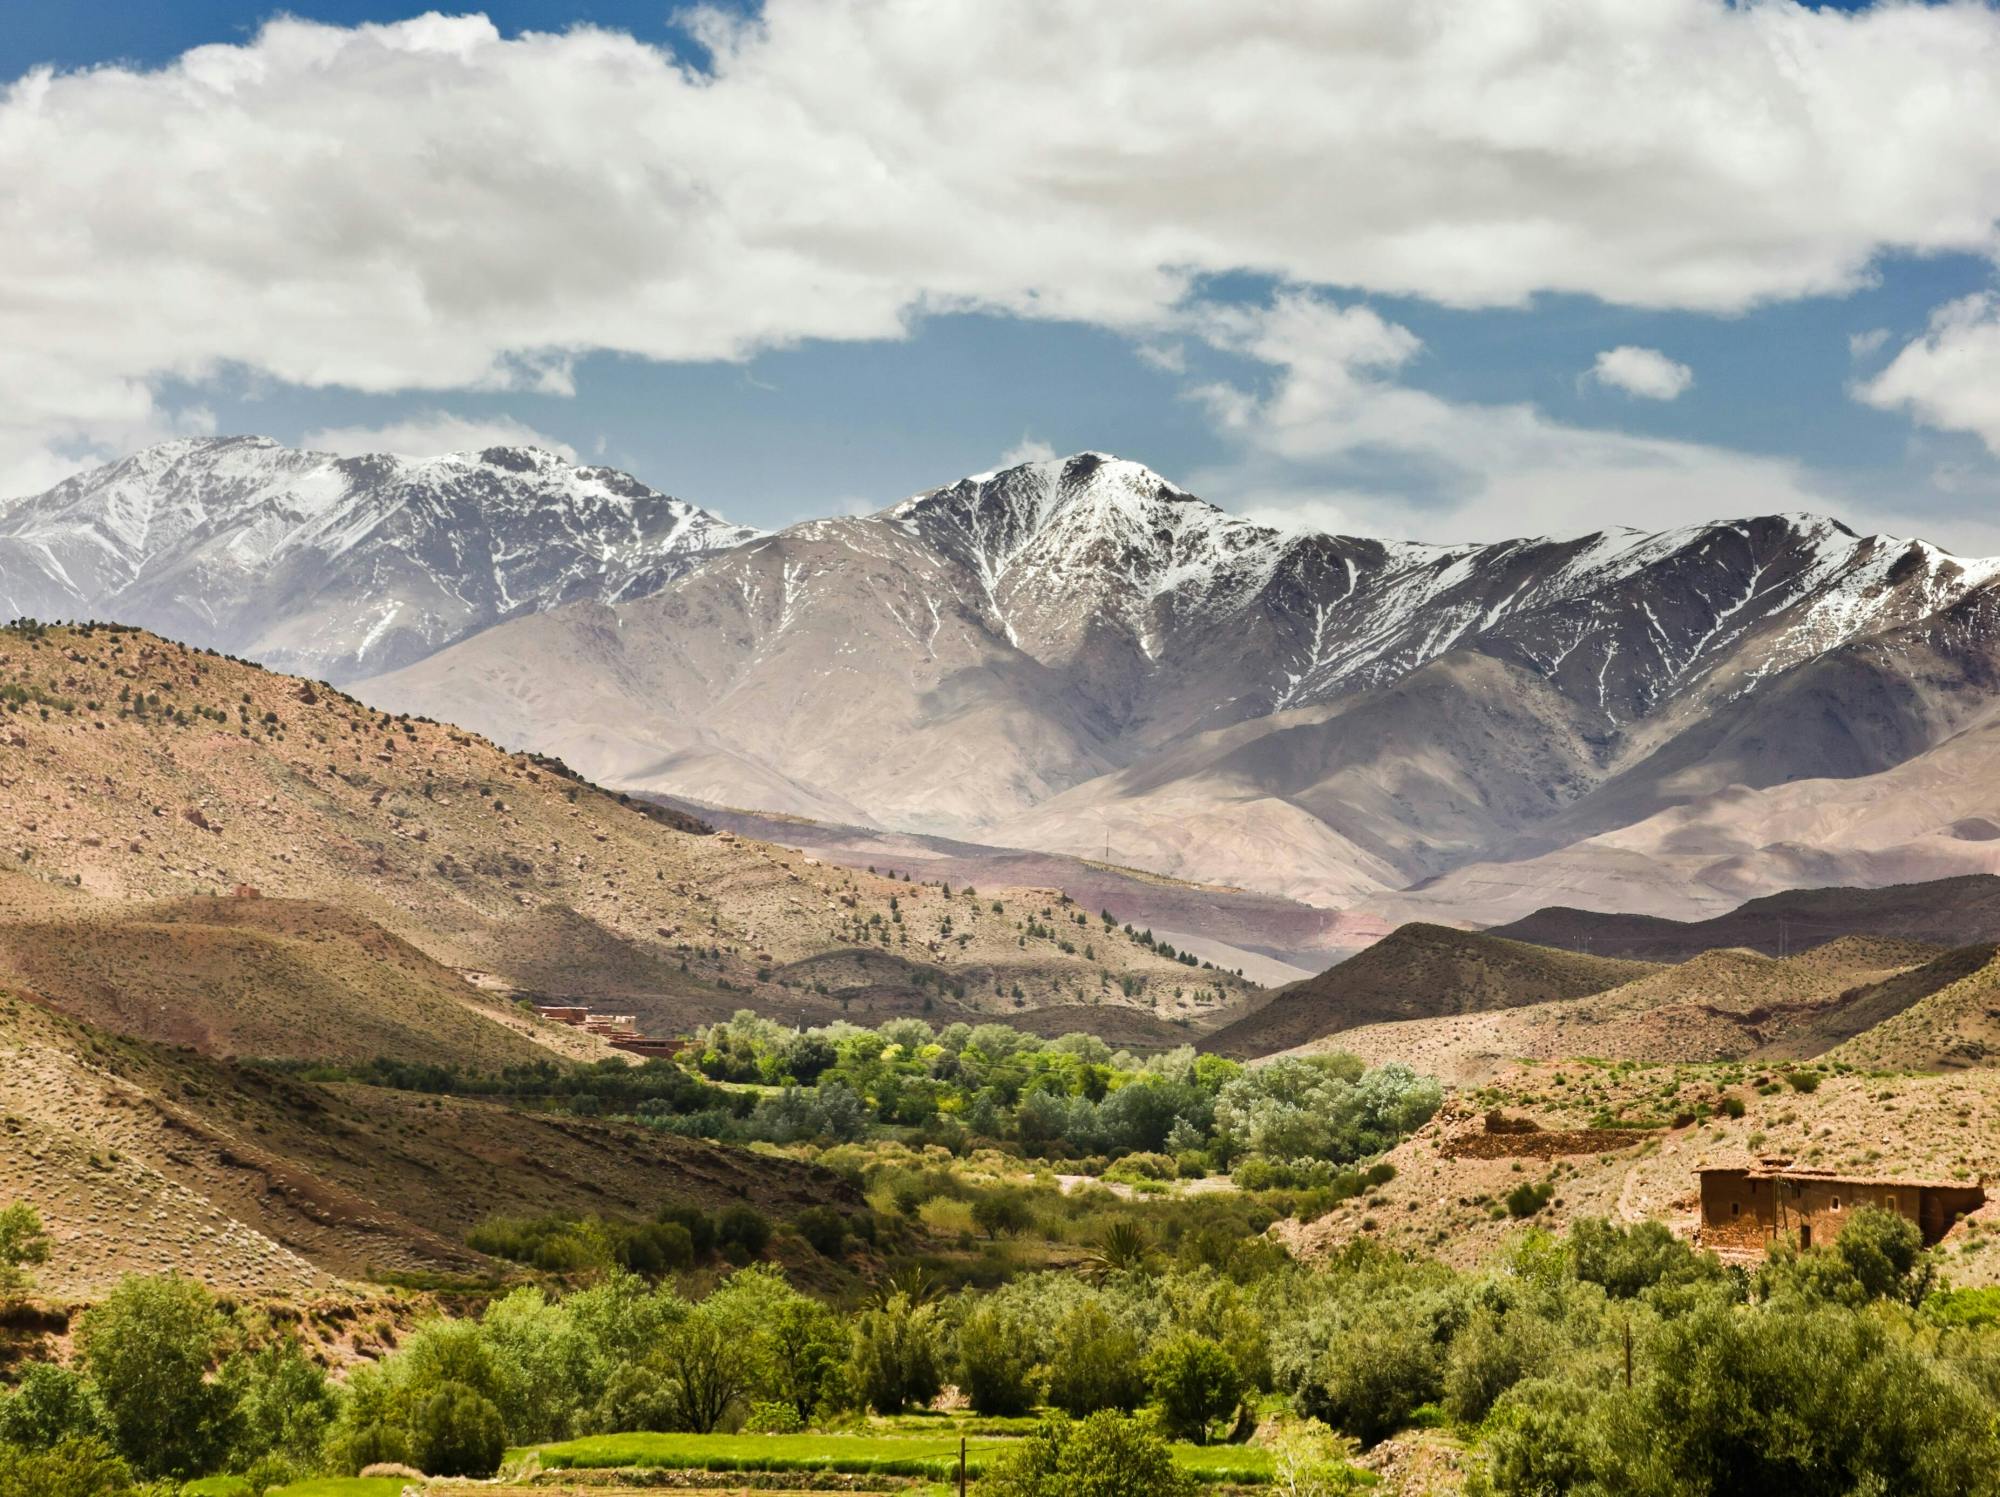 High Atlas Mountains Private 4x4 Tour with Lunch